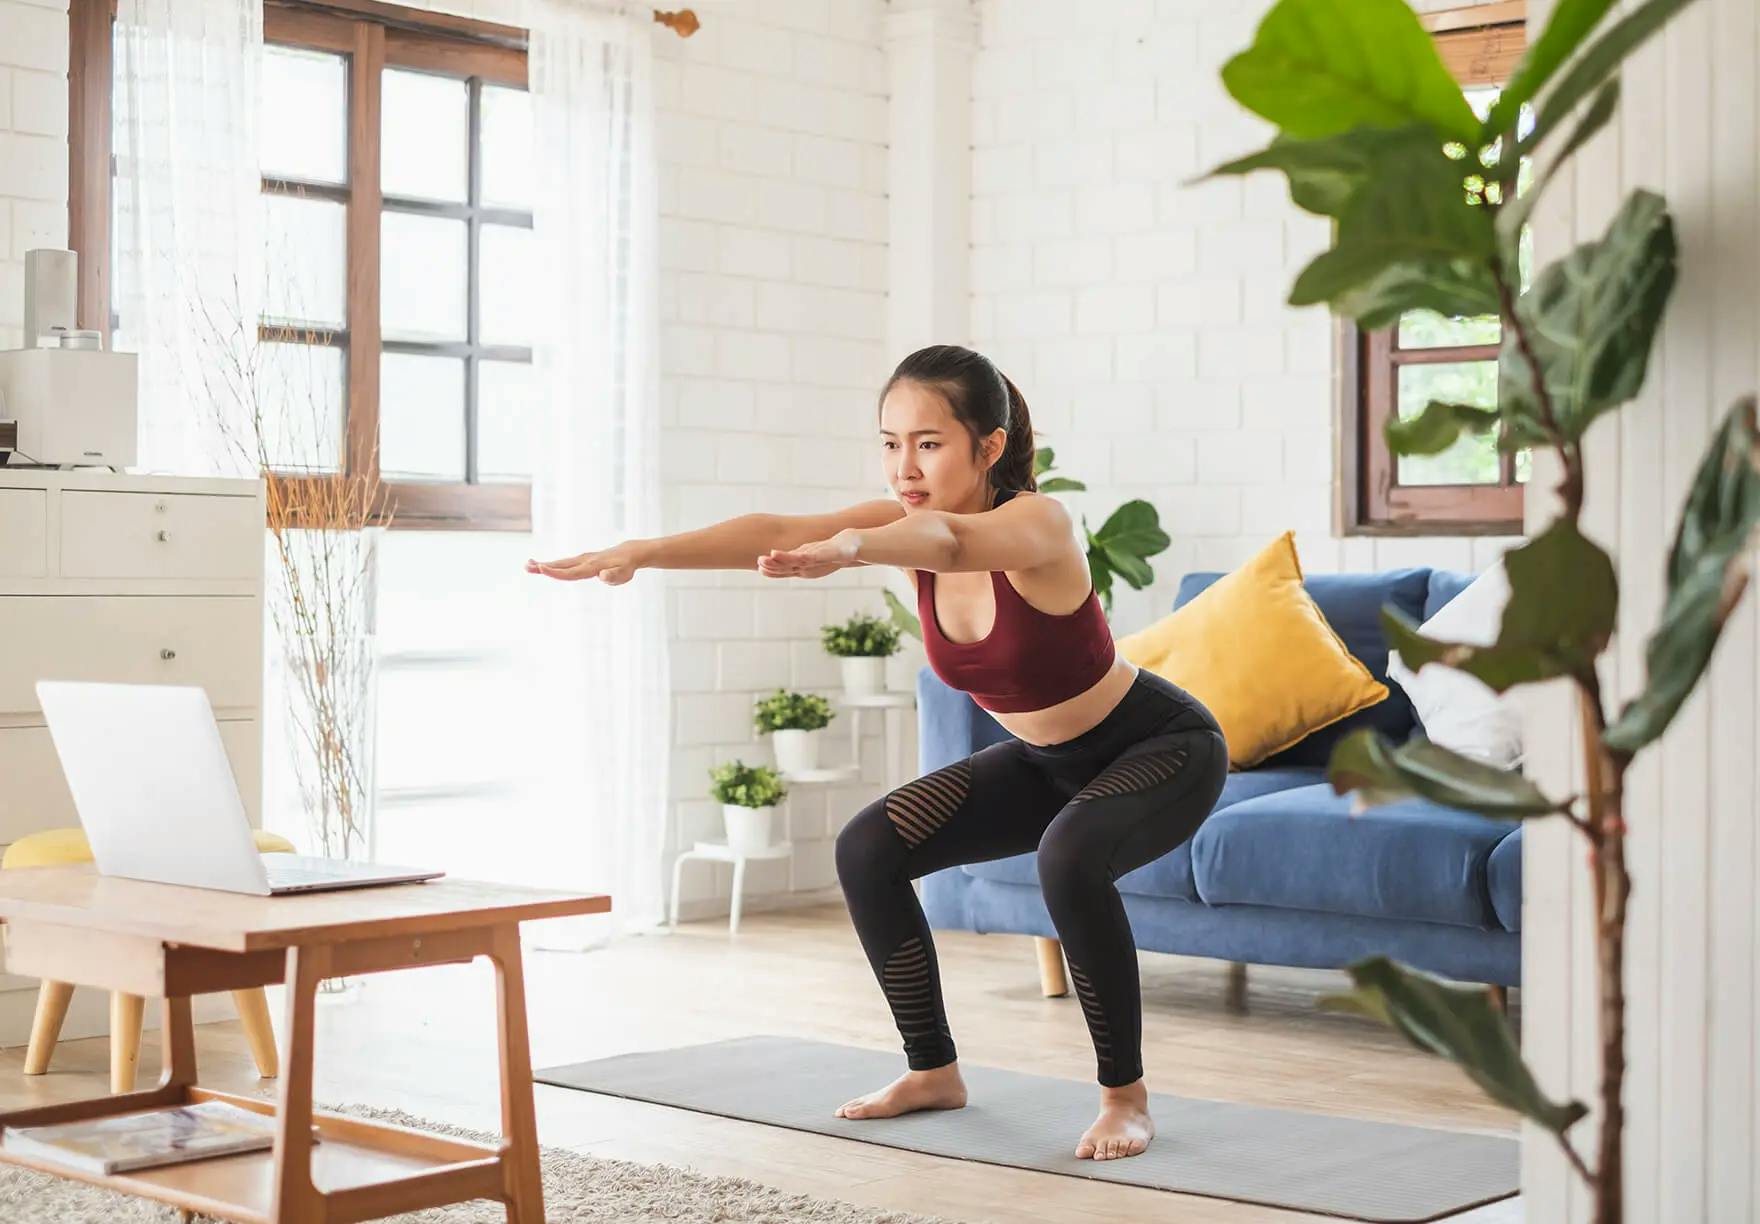 A woman doing yoga in her living room.